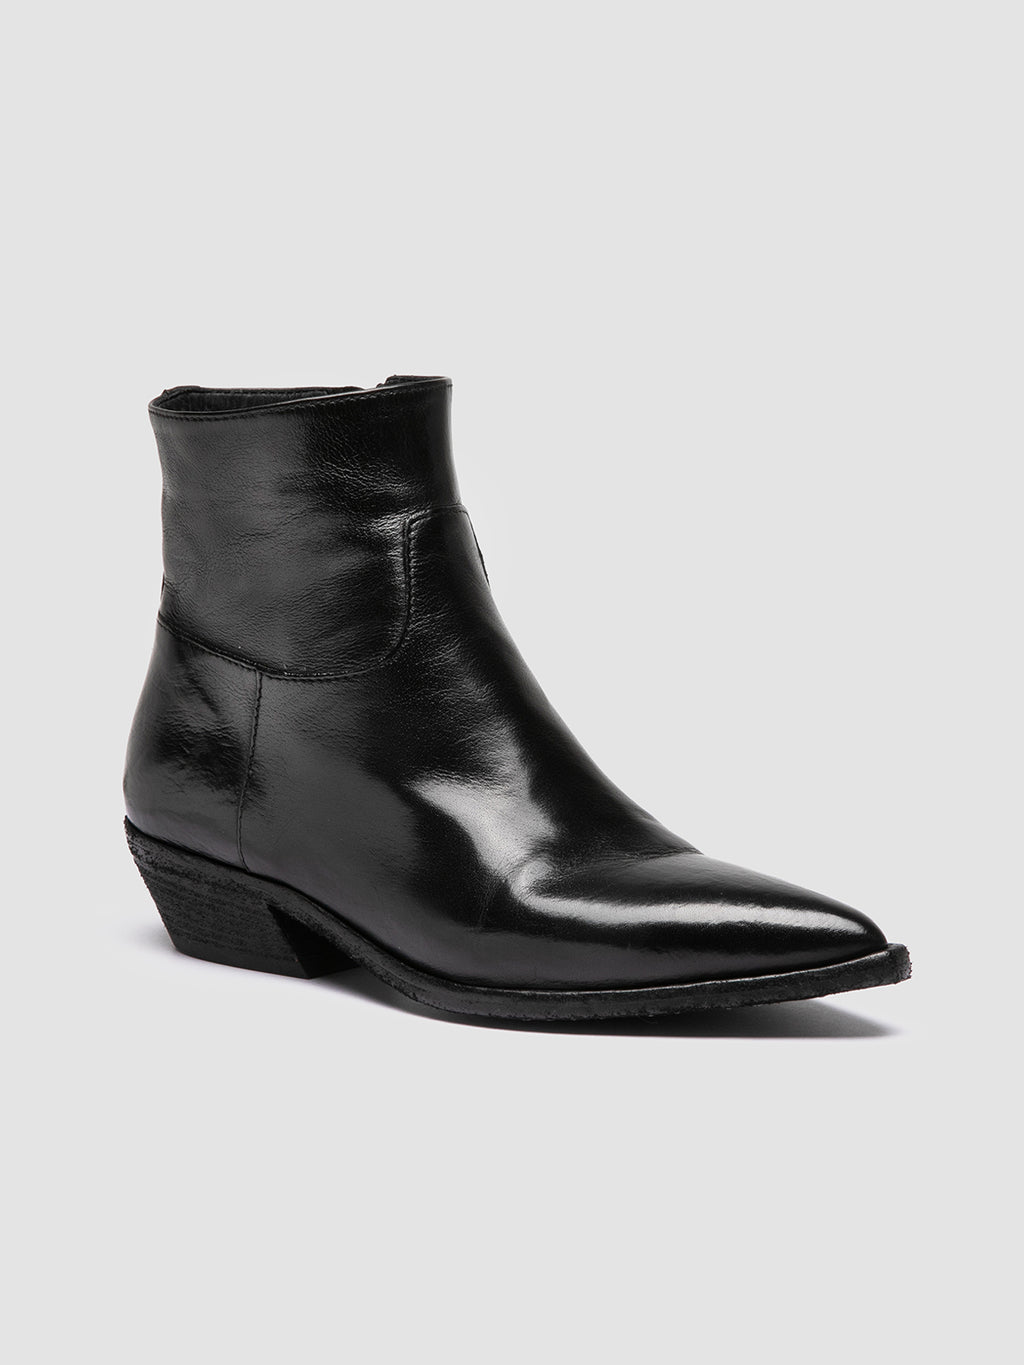 NOELIE DD 102 - Black Leather Zipped Boots